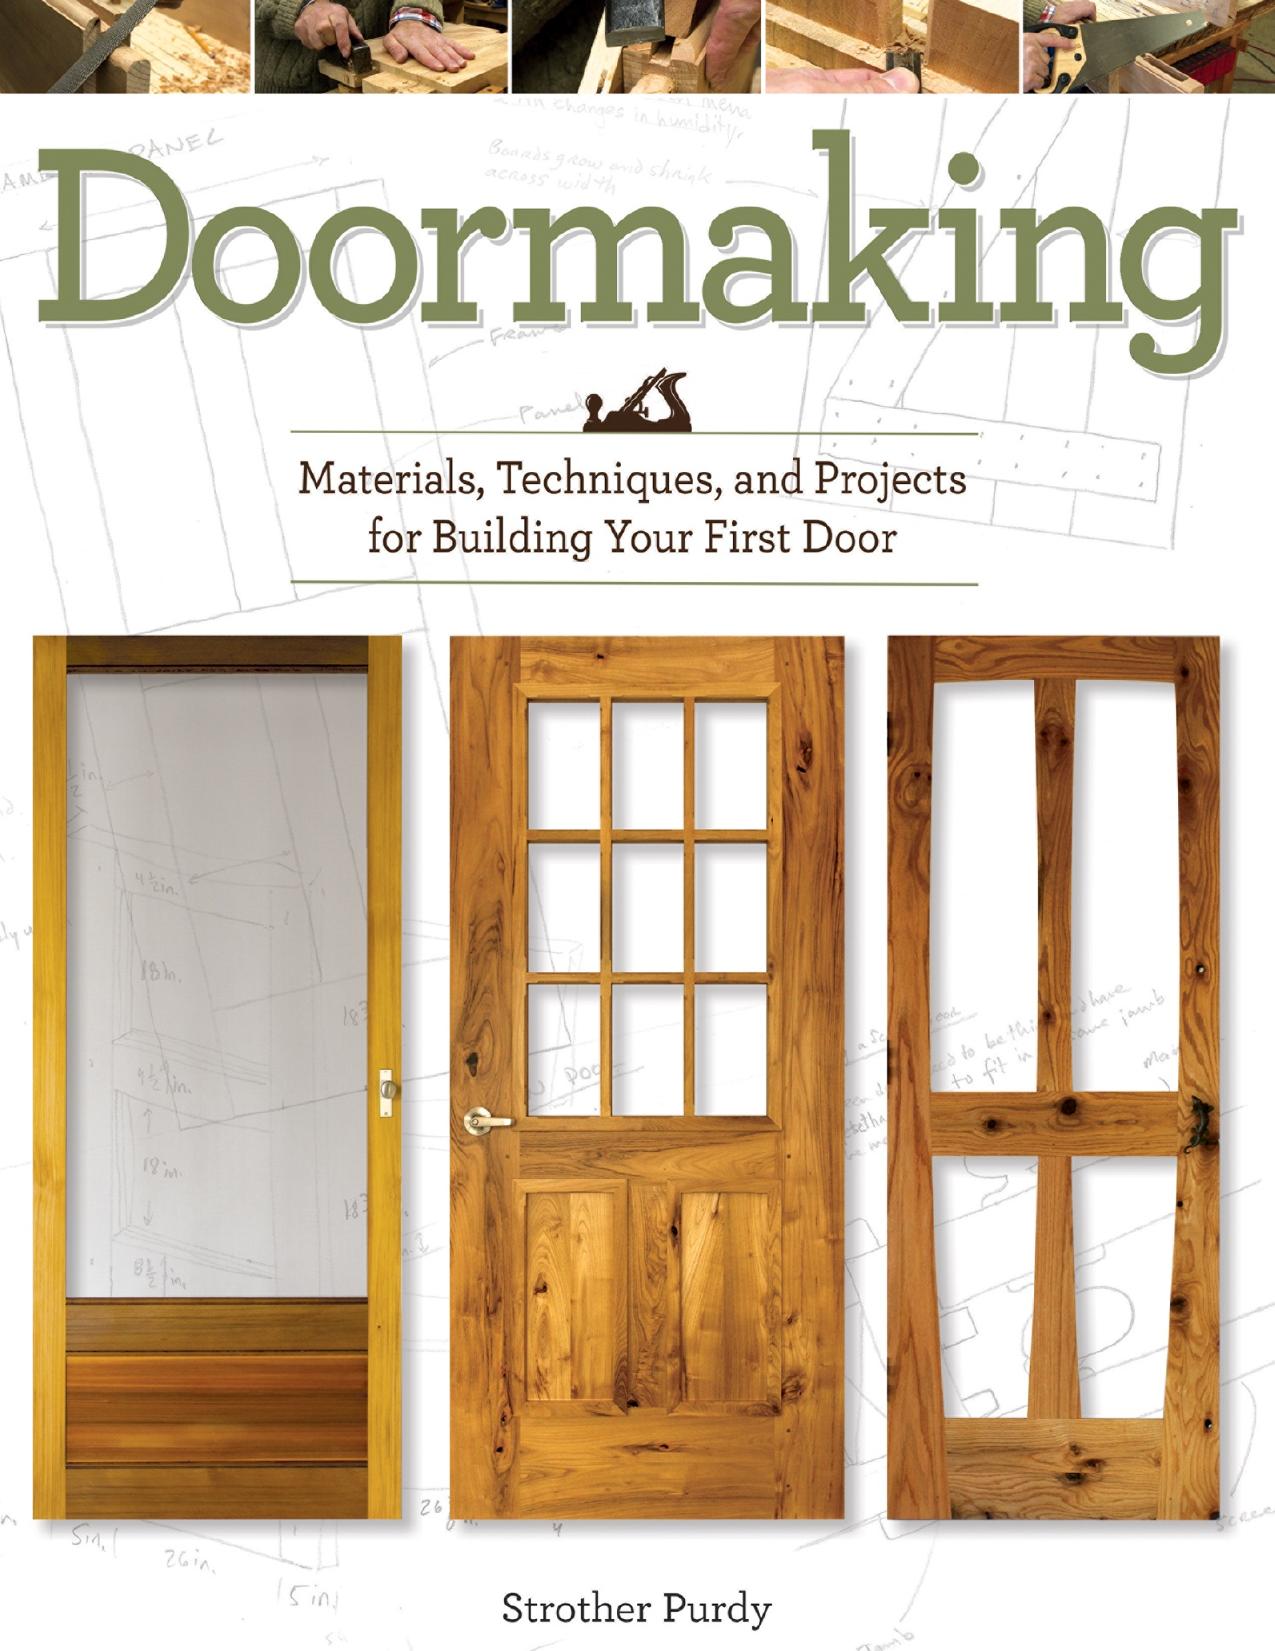 Doormaking: Materials, Techniques, and Projects for Building Your First Door - PDFDrive.com